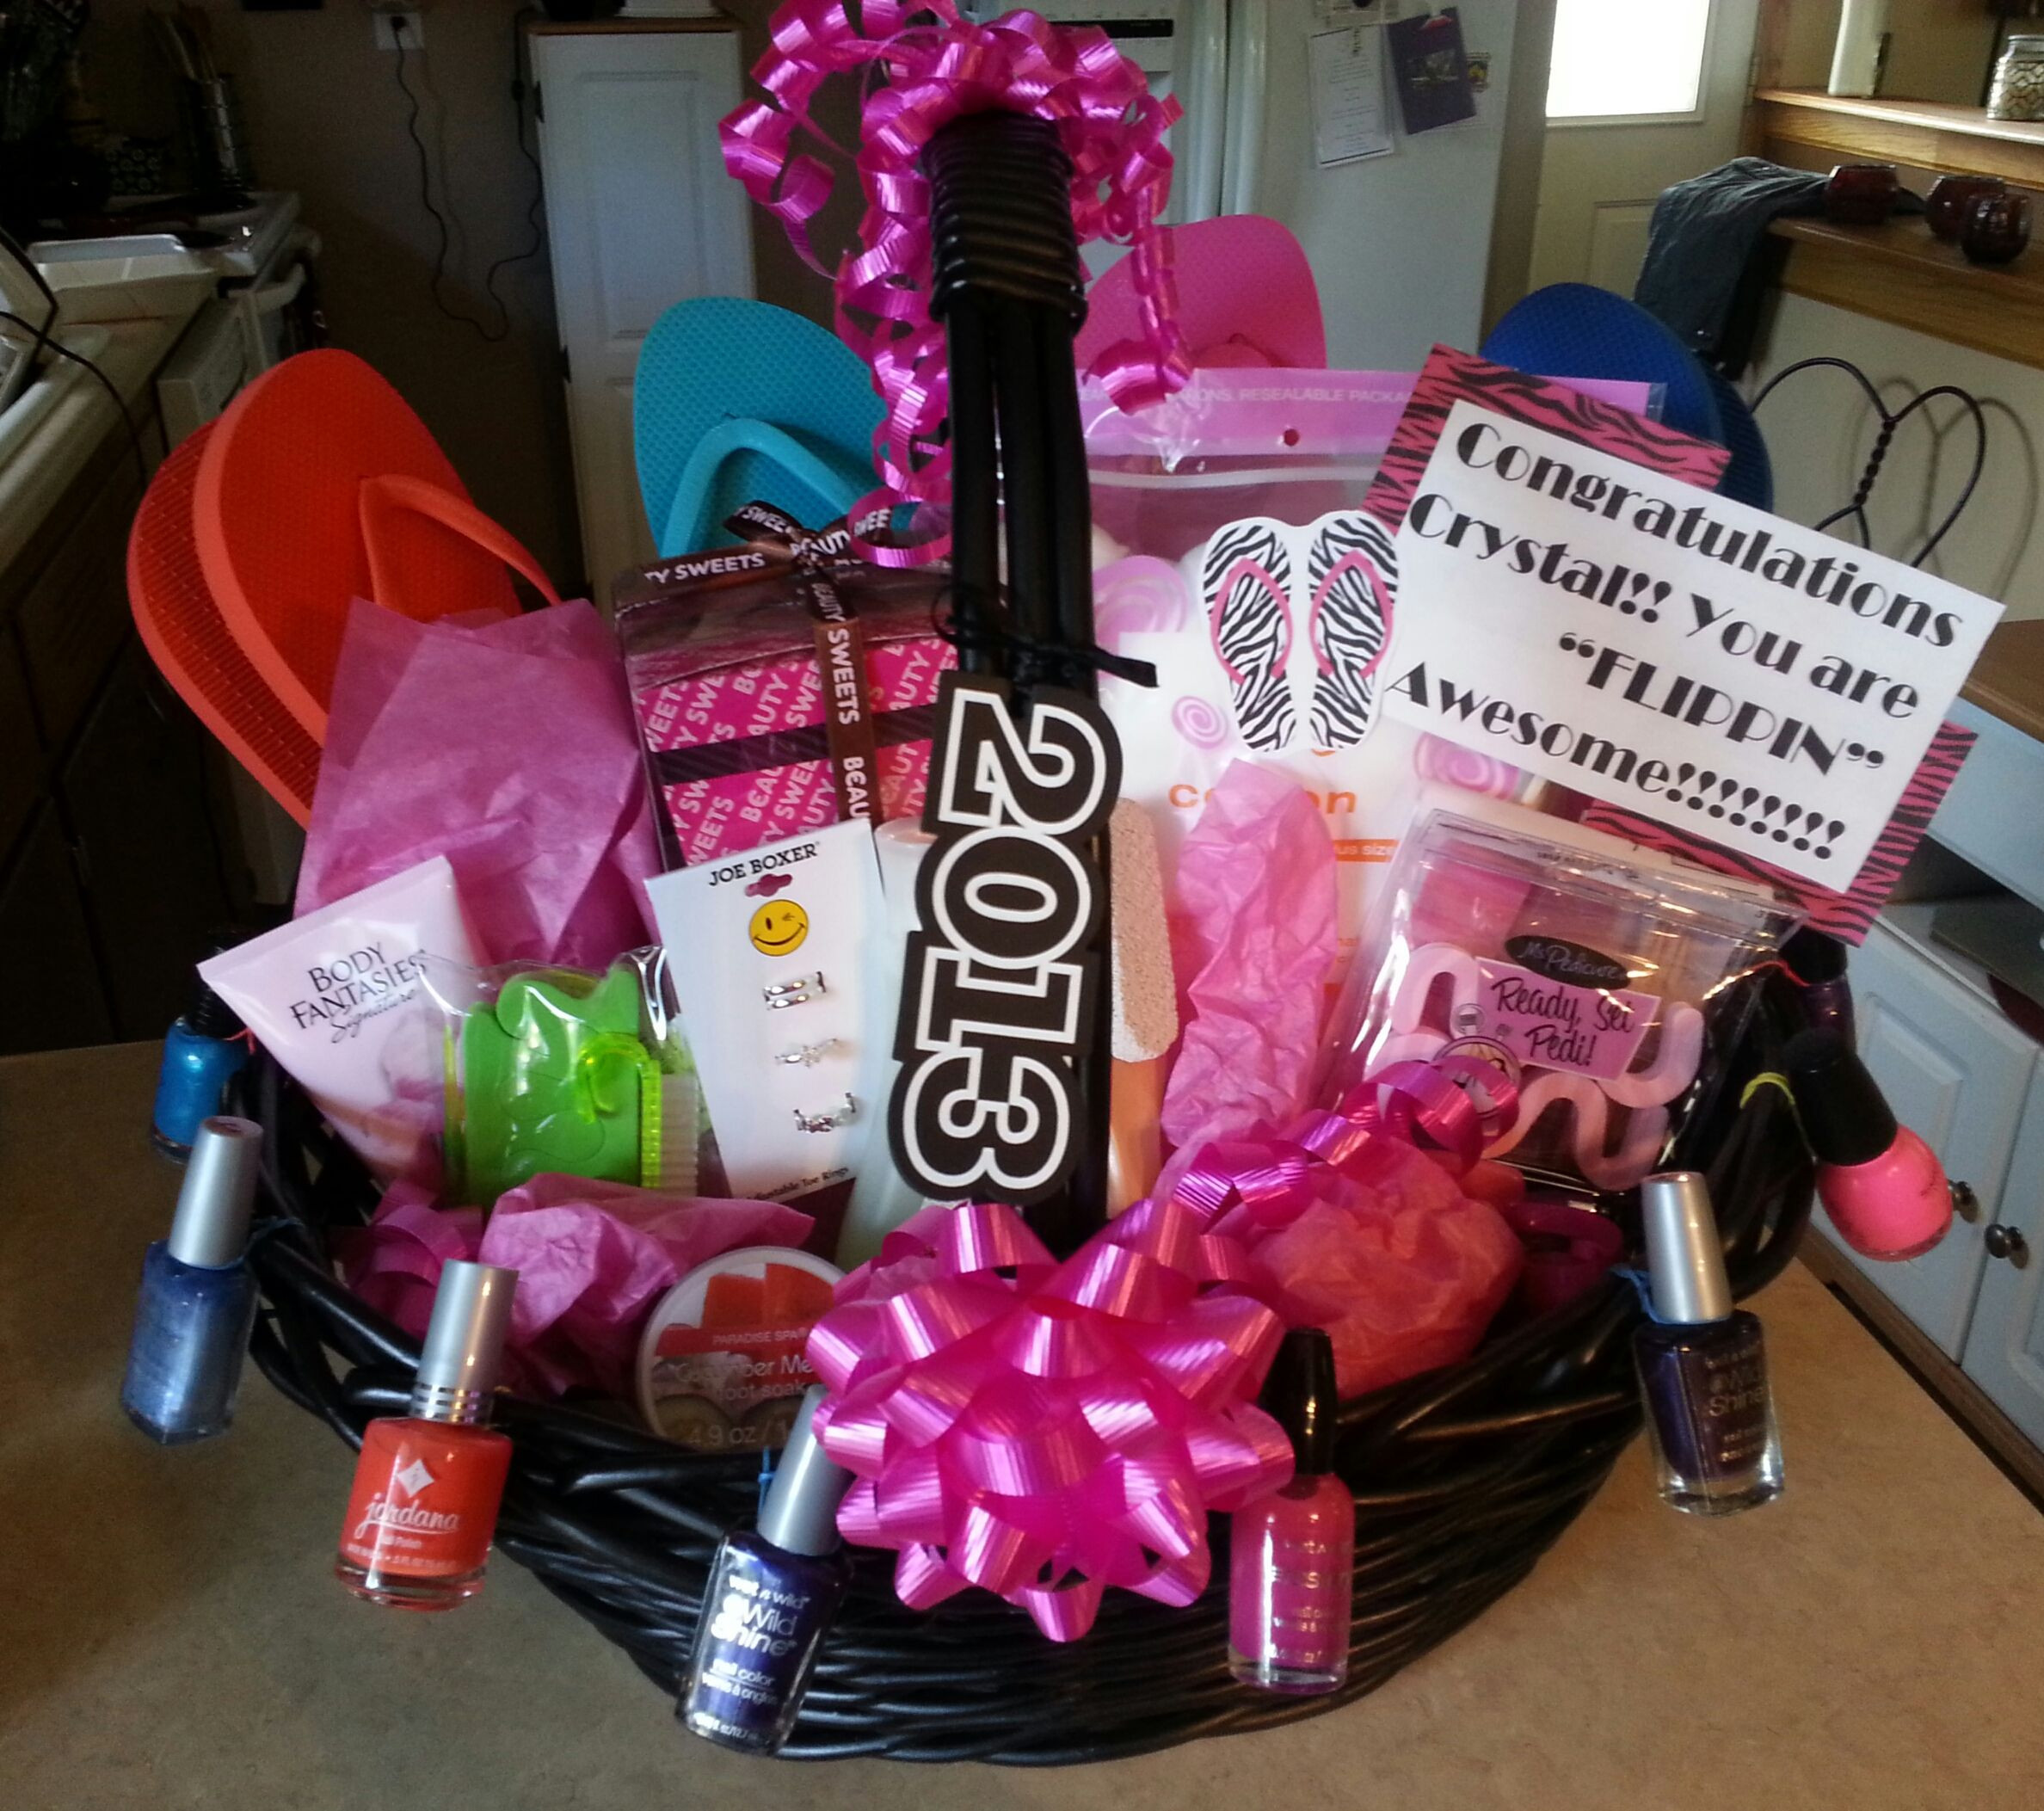 8Th Grade Graduation Gift Ideas For Niece
 Great Graduation Gift for a girl Made this one for my